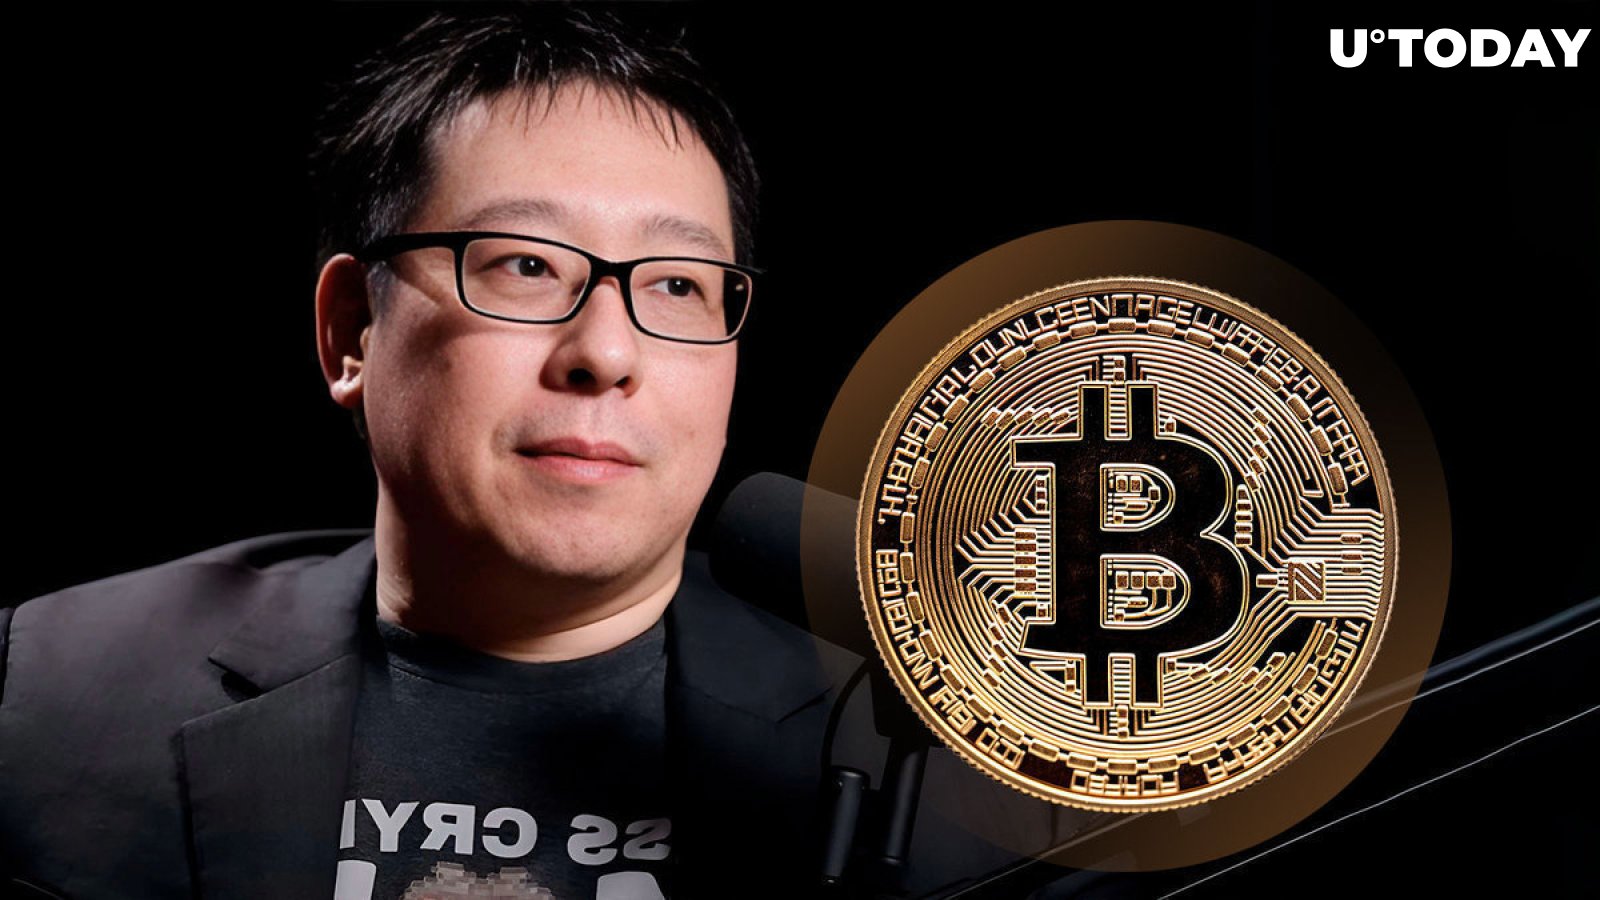 List of Bullish Bitcoin Factors 'Normies' Unaware of Shown by Samson Mow